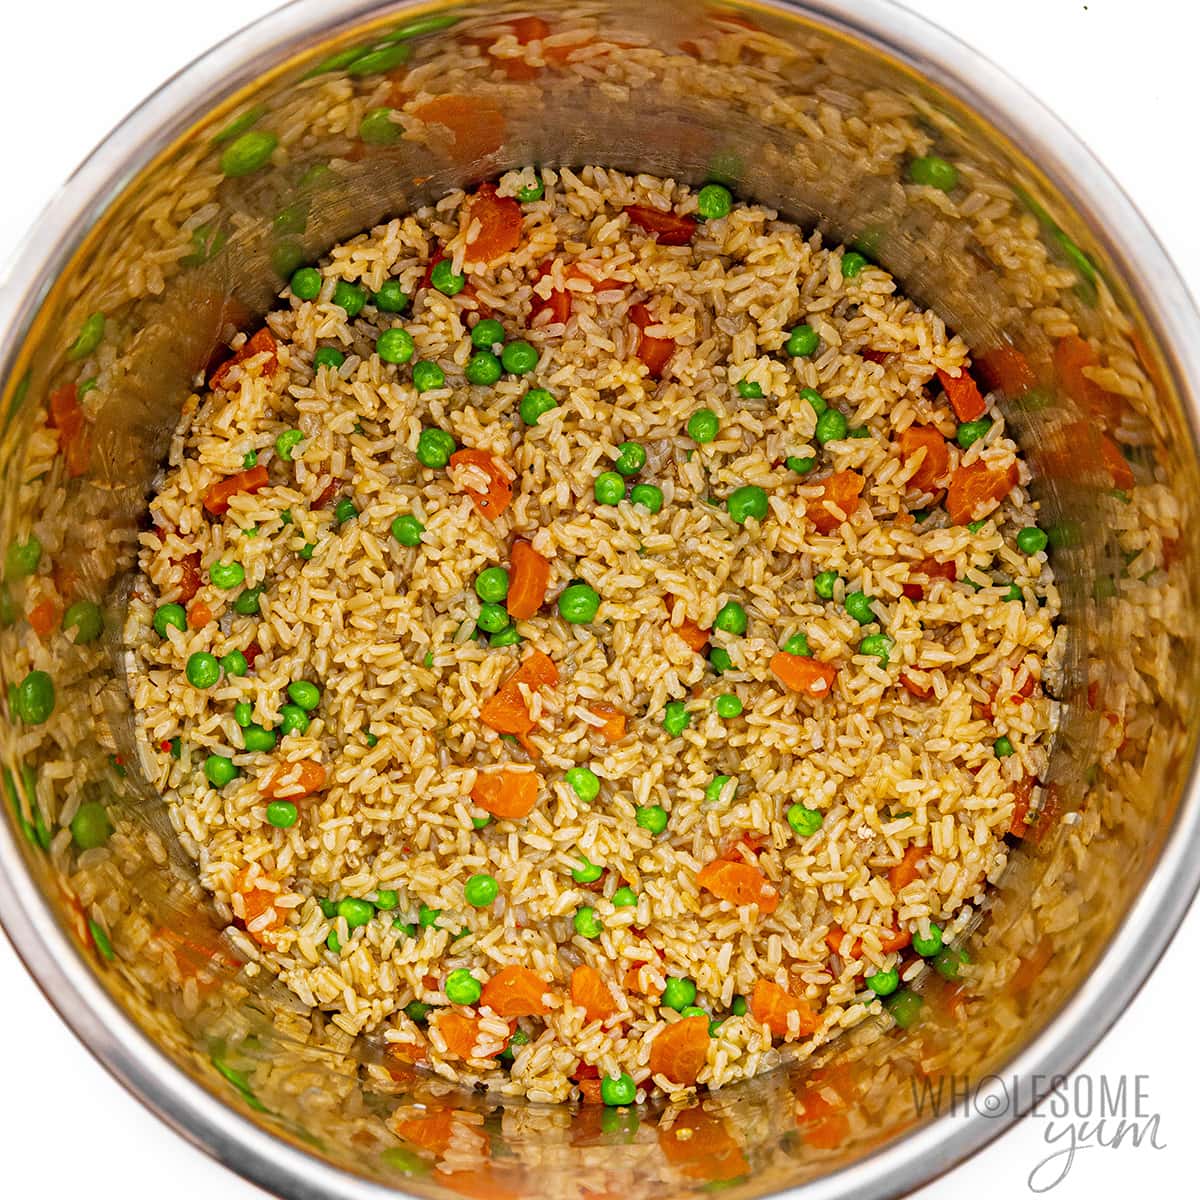 Rice and vegetables mixed together.